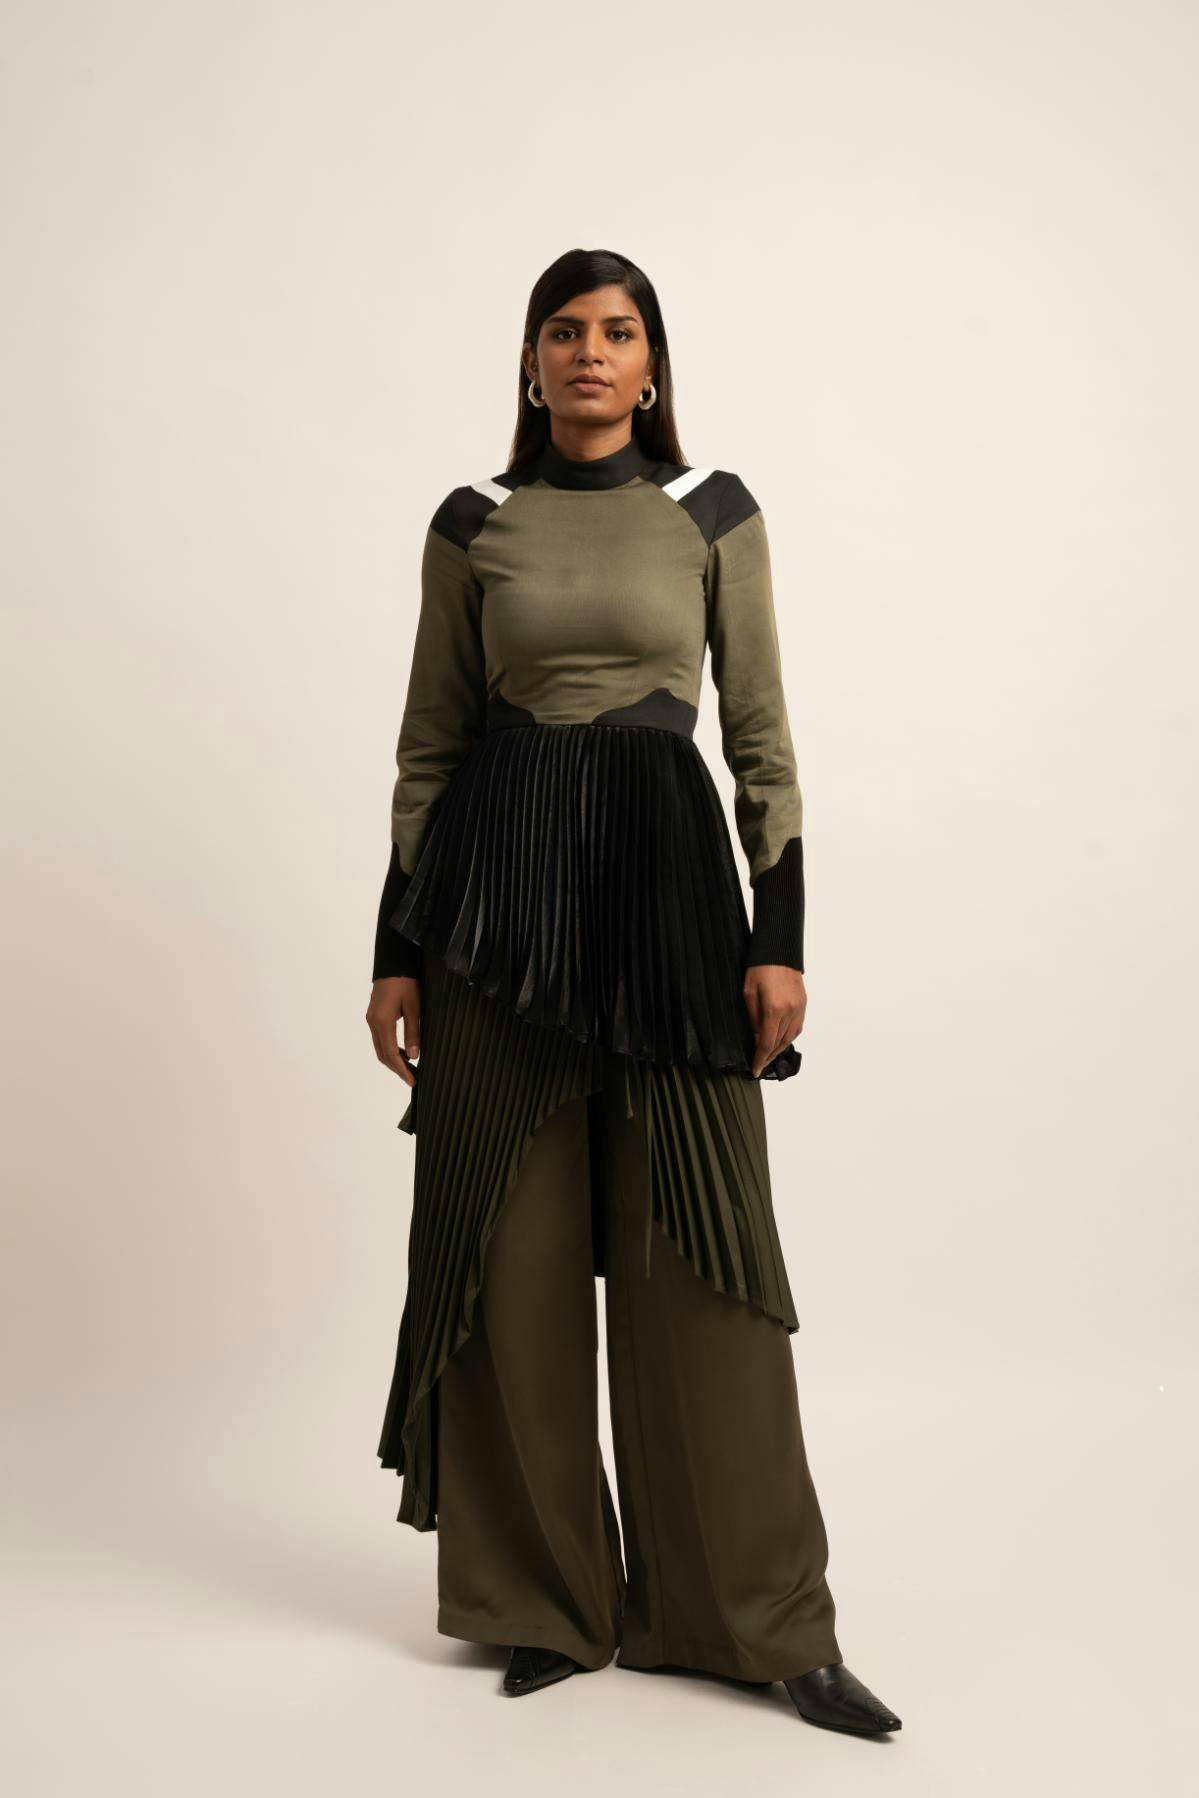 The Dreamscape Top, a product by Siddhant Agrawal Label